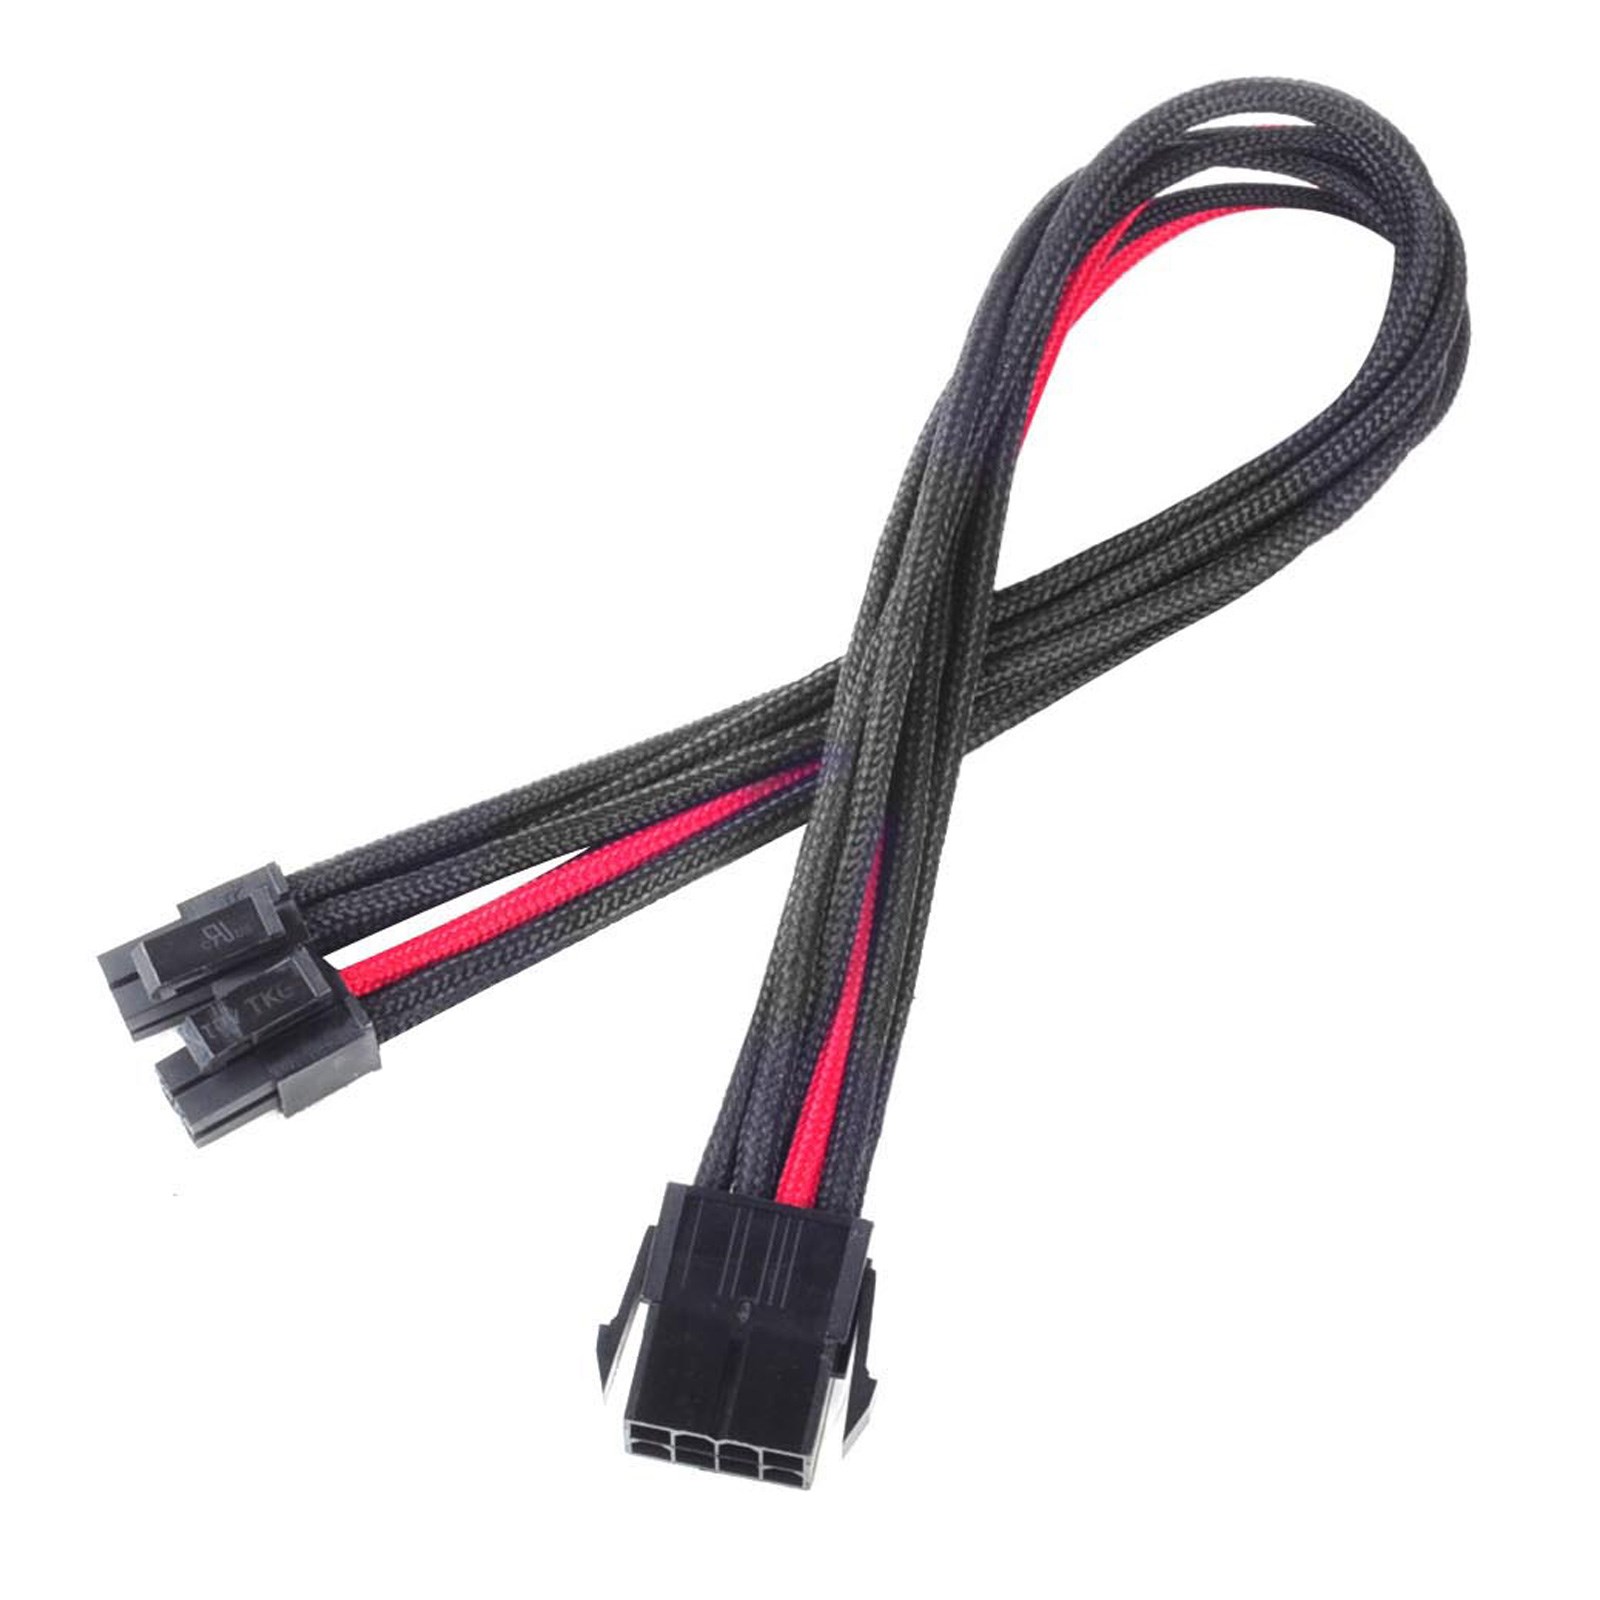 Photos - Cable (video, audio, USB) SilverStone PP07-EPS8BR 8-pin EPS 300mm Extension Cable Sleeved in SST-PP0 